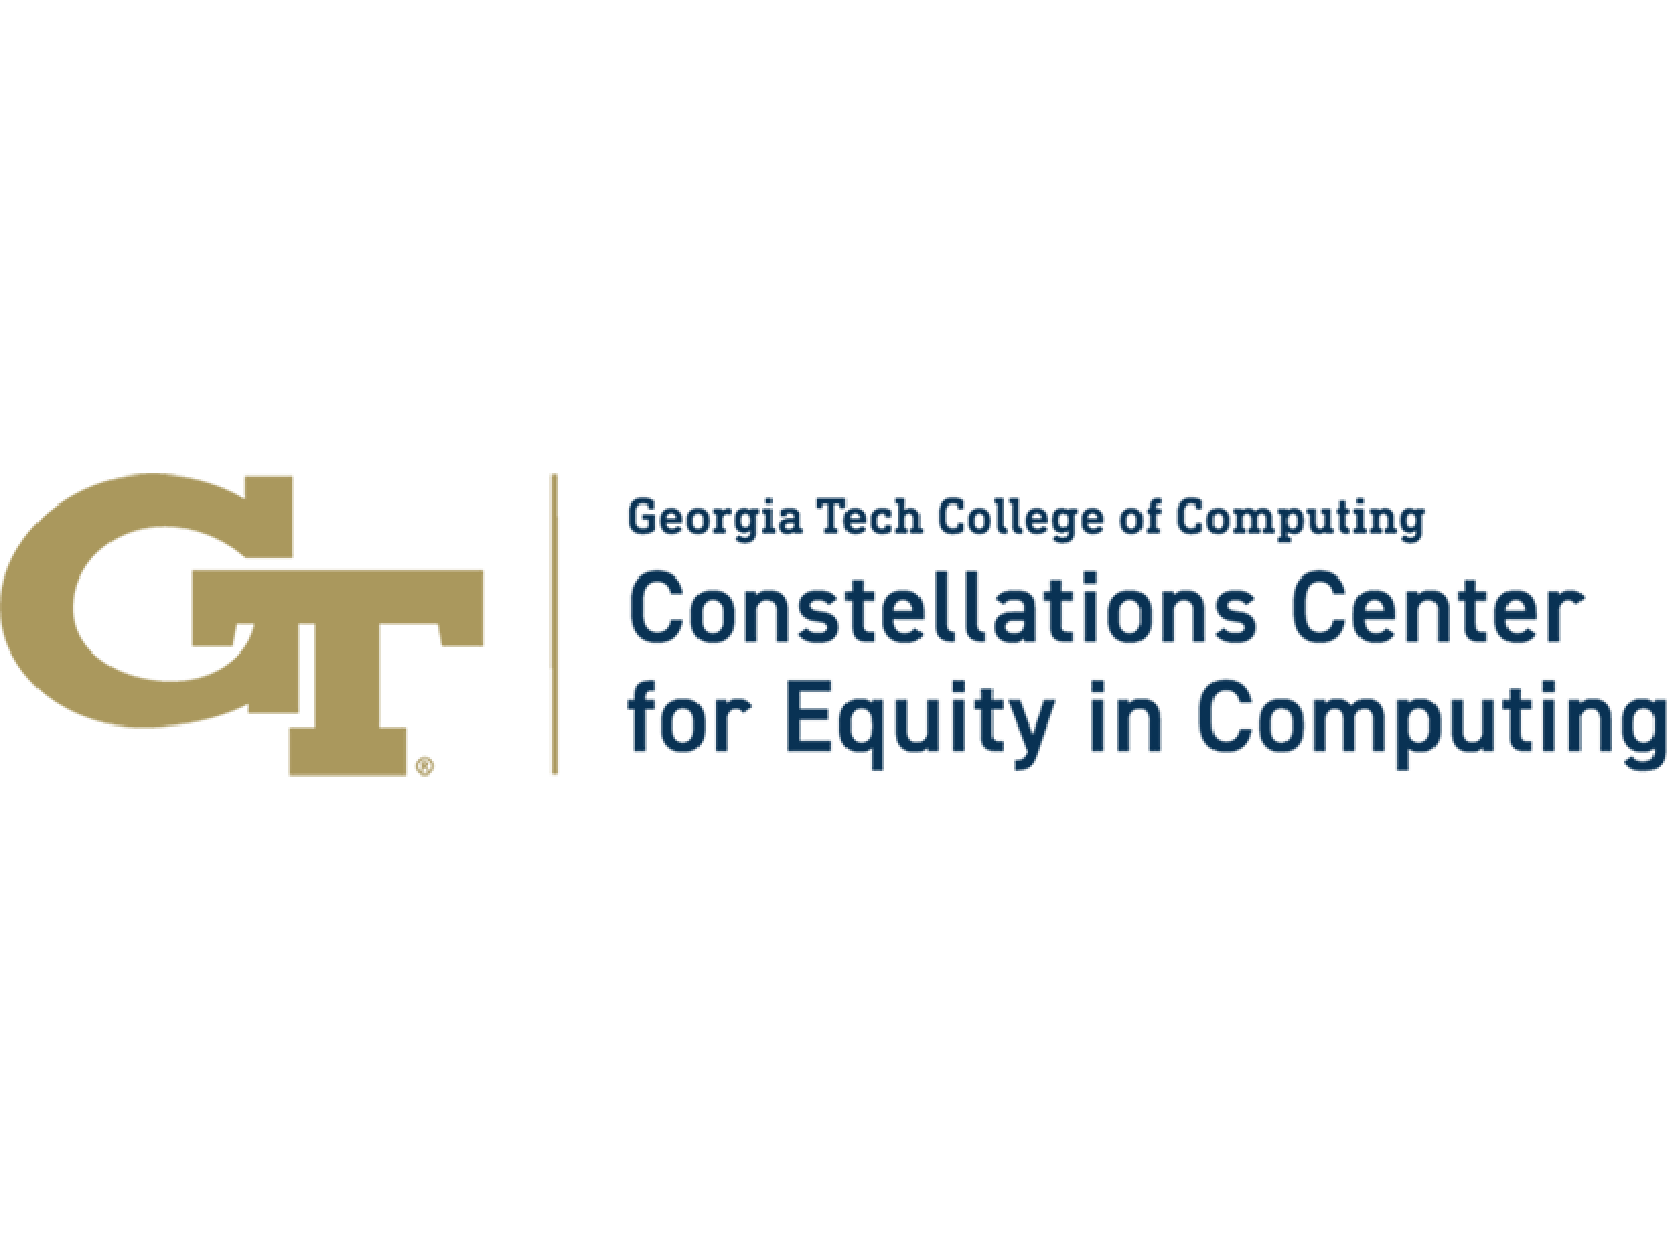 Georgia Tech Constellations Center for Equity in Computing